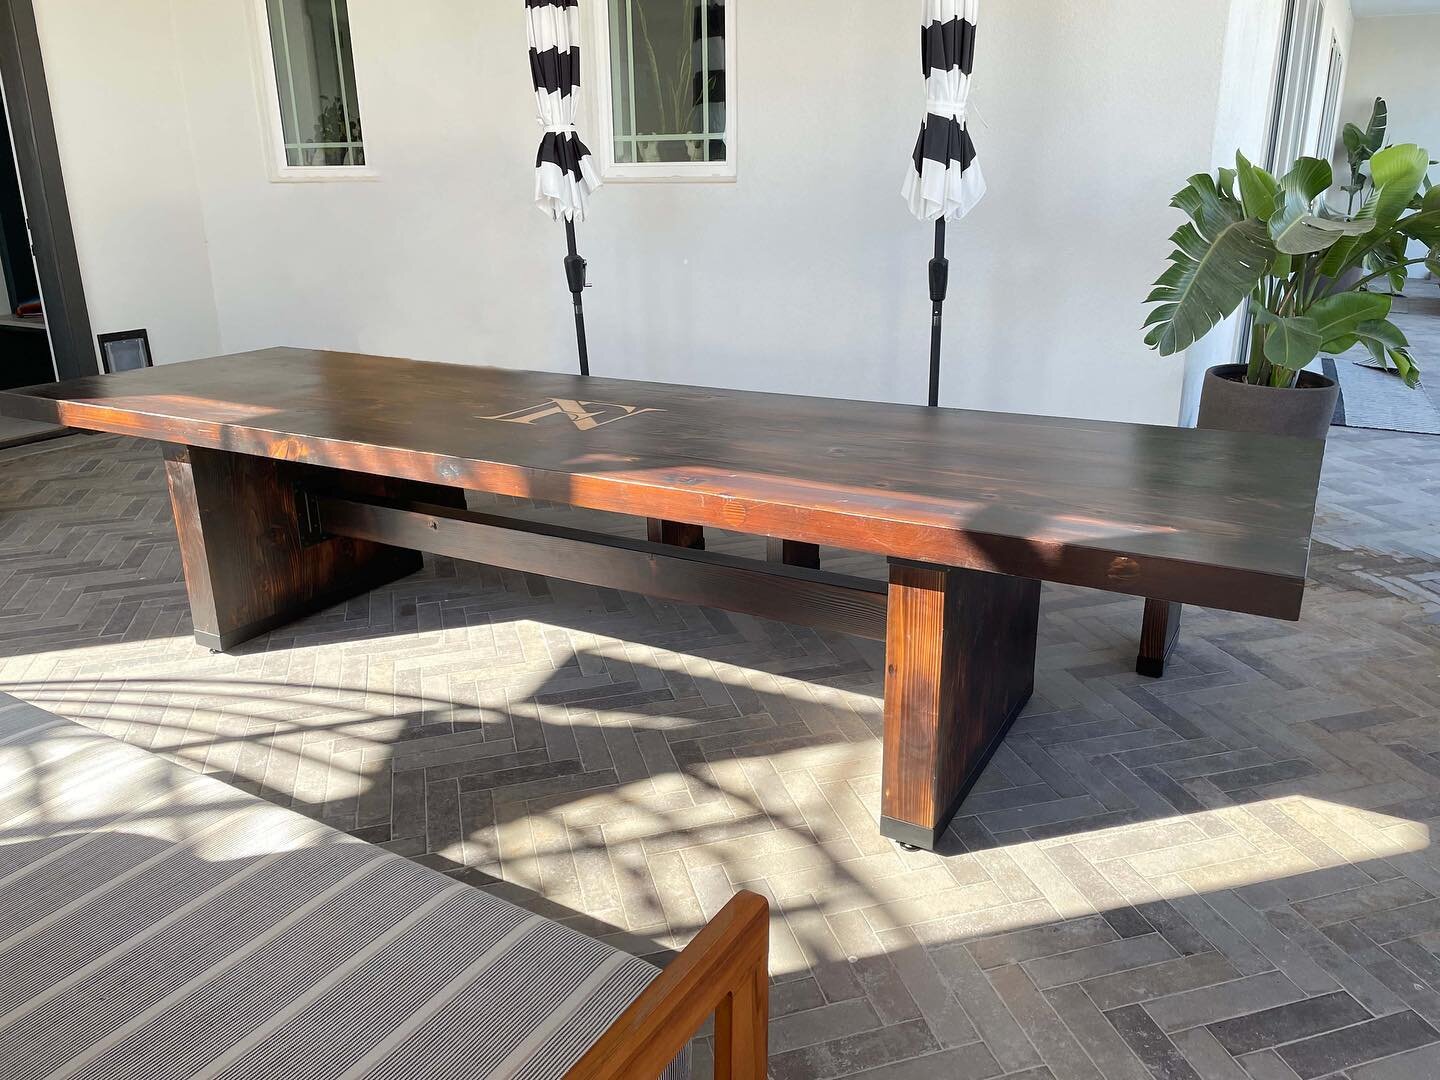 Our latest furniture project was this 12 ft. long cedar table. The design direction was for it to be in a medieval style. Rather than staining the wood we used the shou sugi ban burning method for treating and coloring the wood. The custom designed m